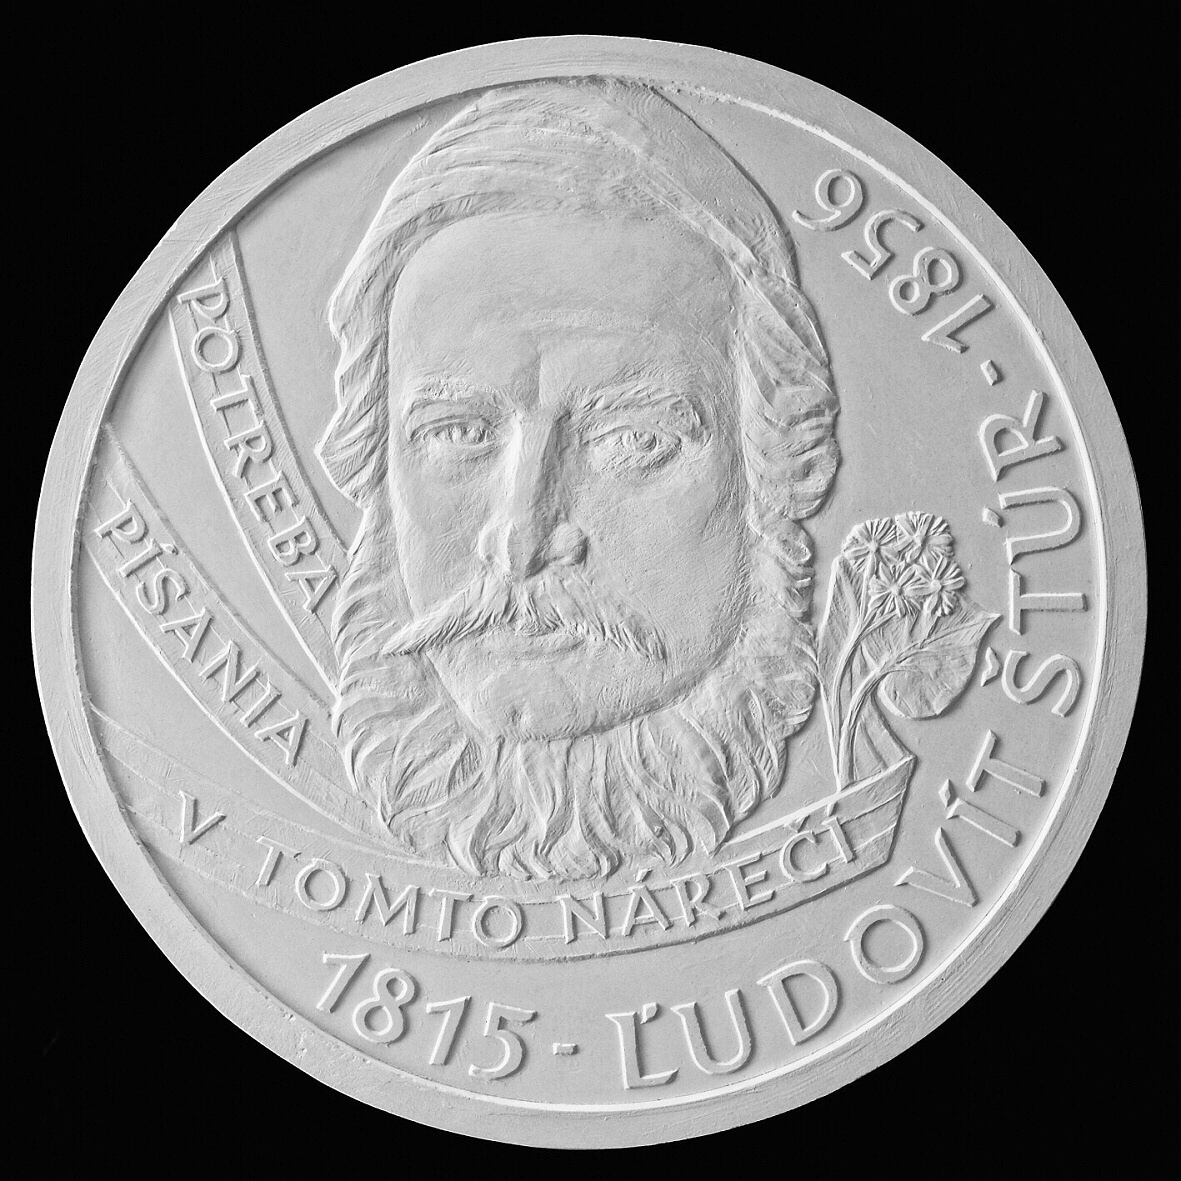 First prize (design selected for the coin)